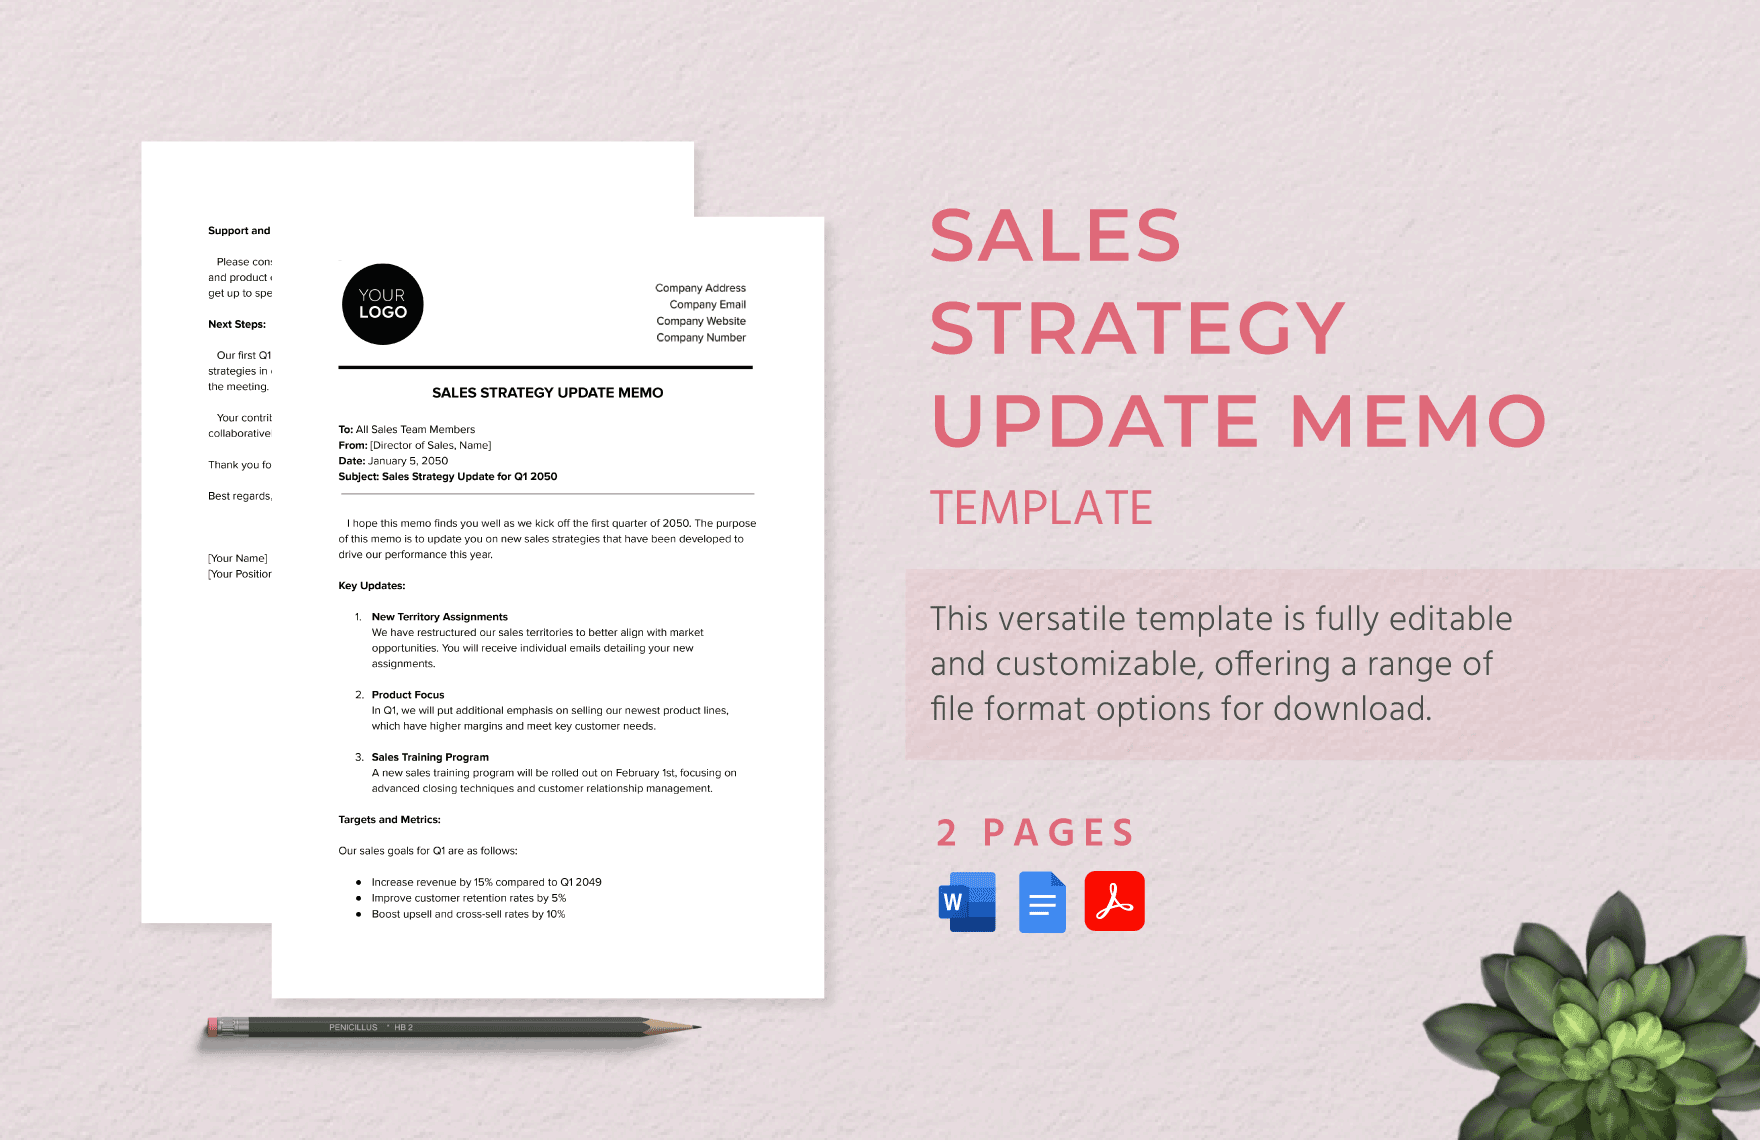 Sales Strategy Update Memo Template